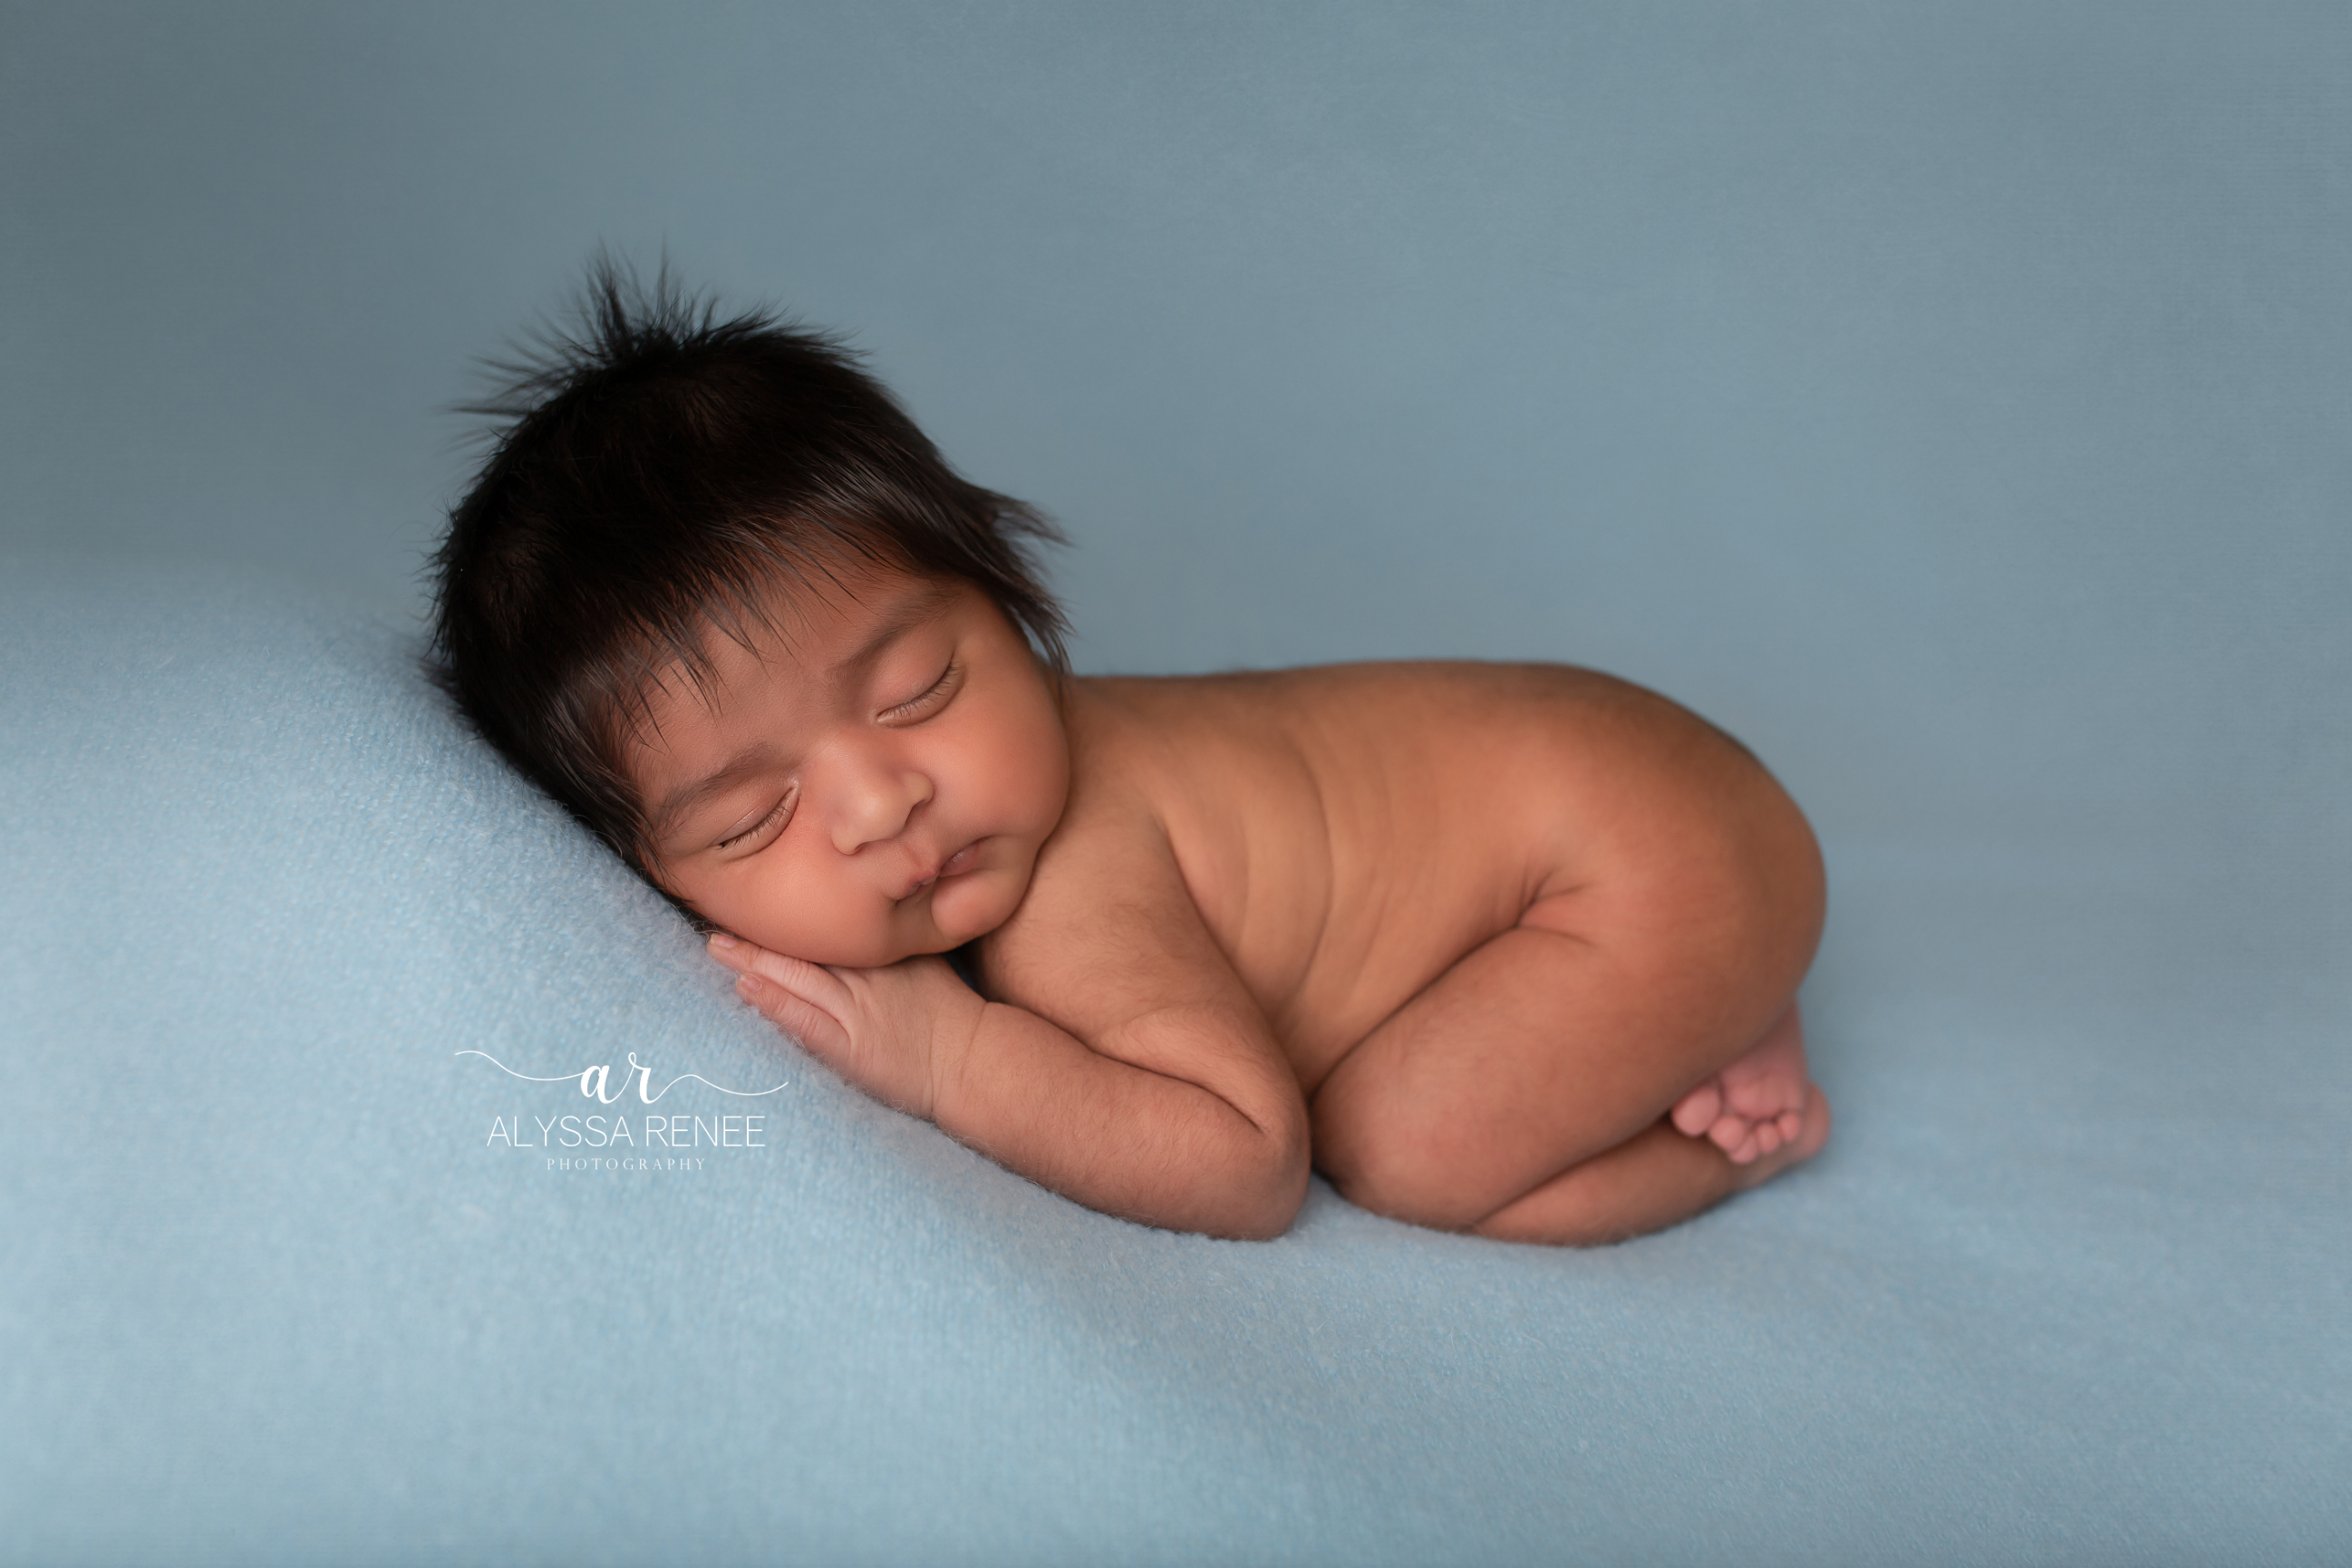 Baby in artistic portrait with blue blanket with a blue background